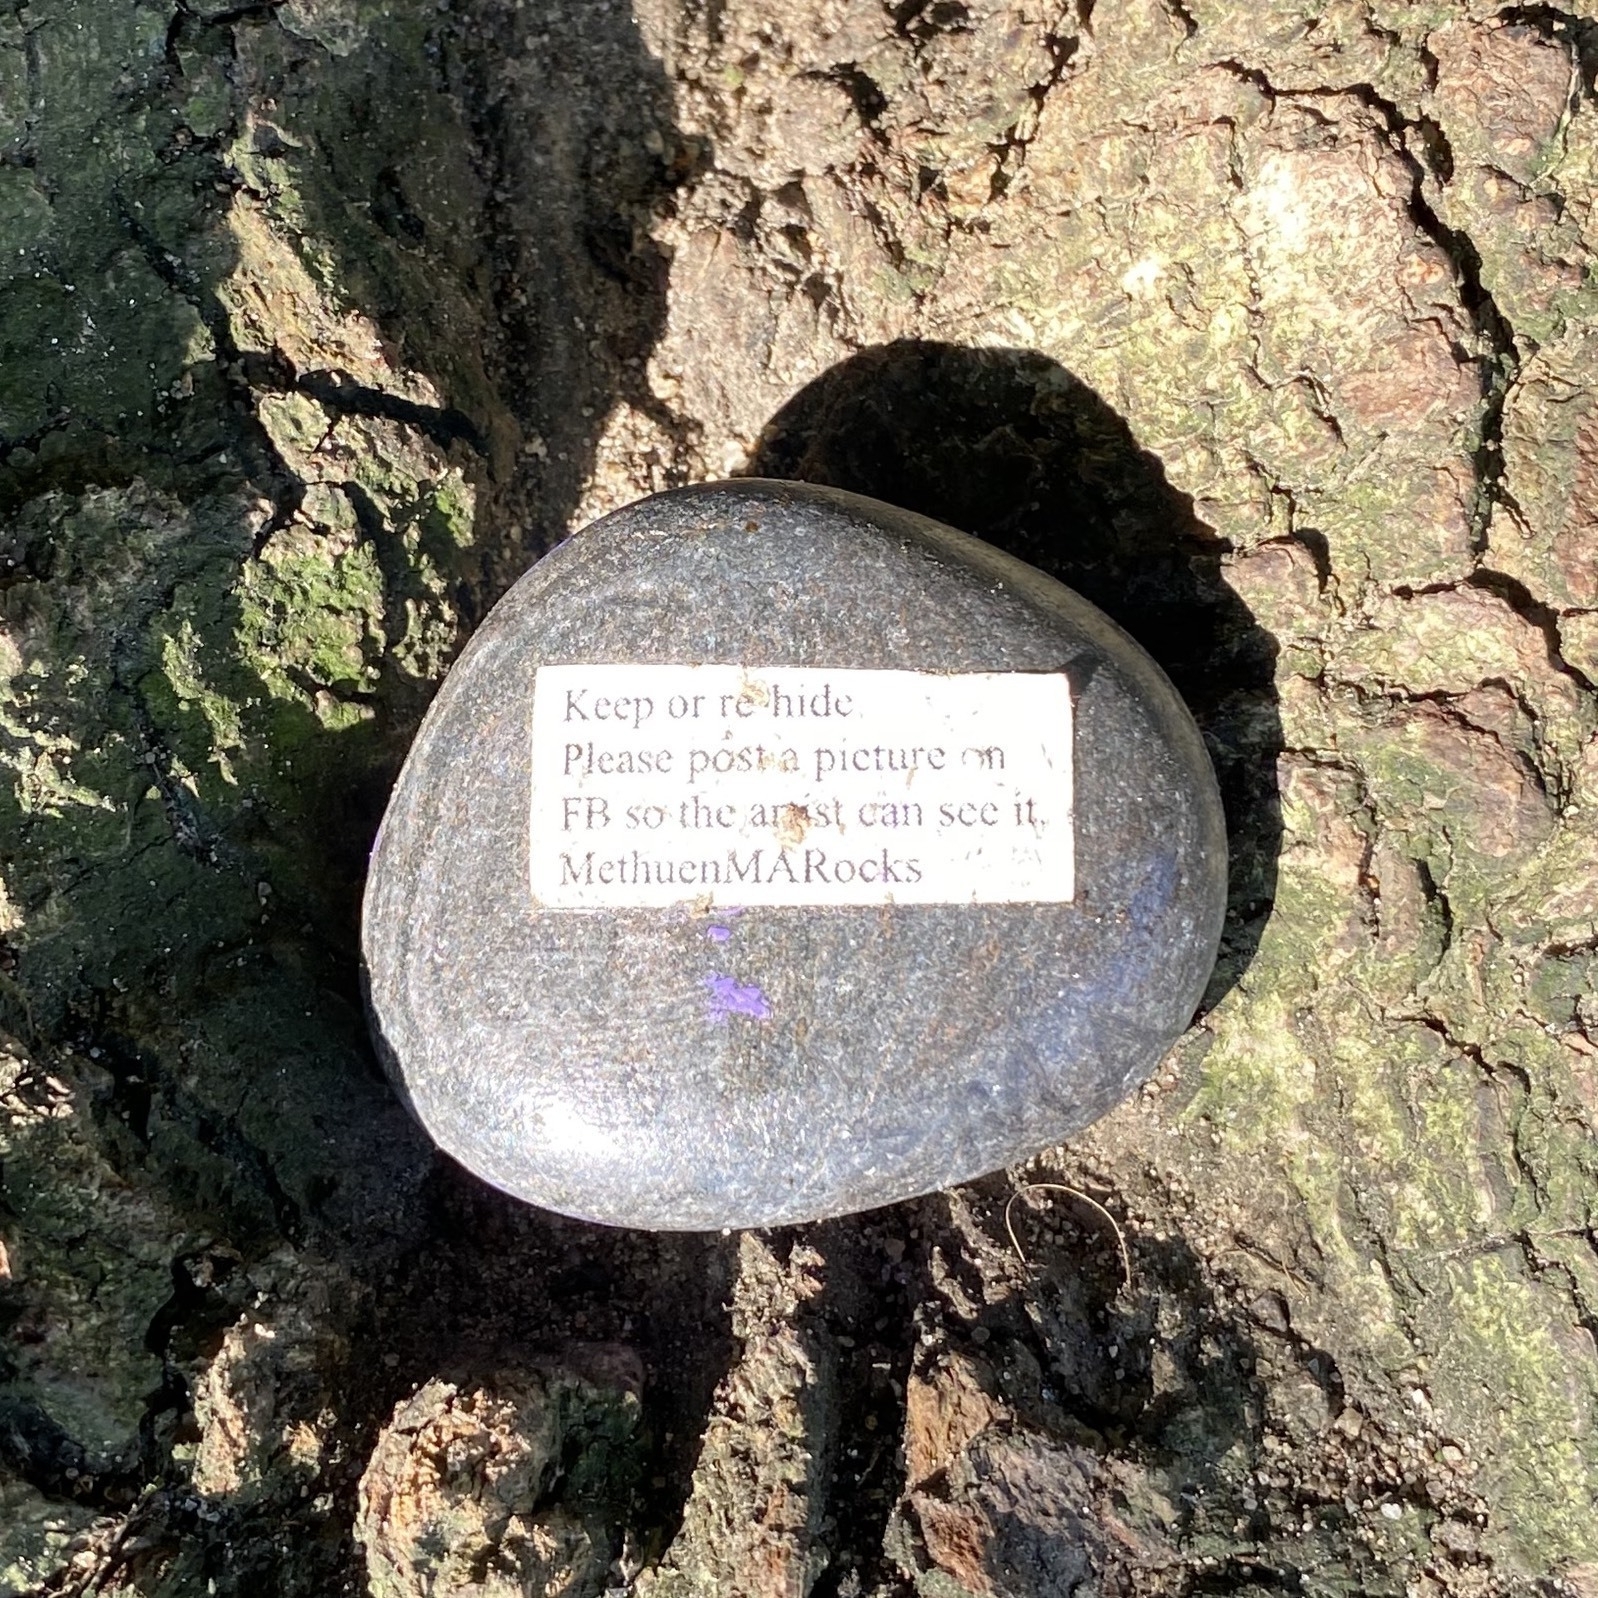 Close up of a small rock with a printed label lying on tree roots.